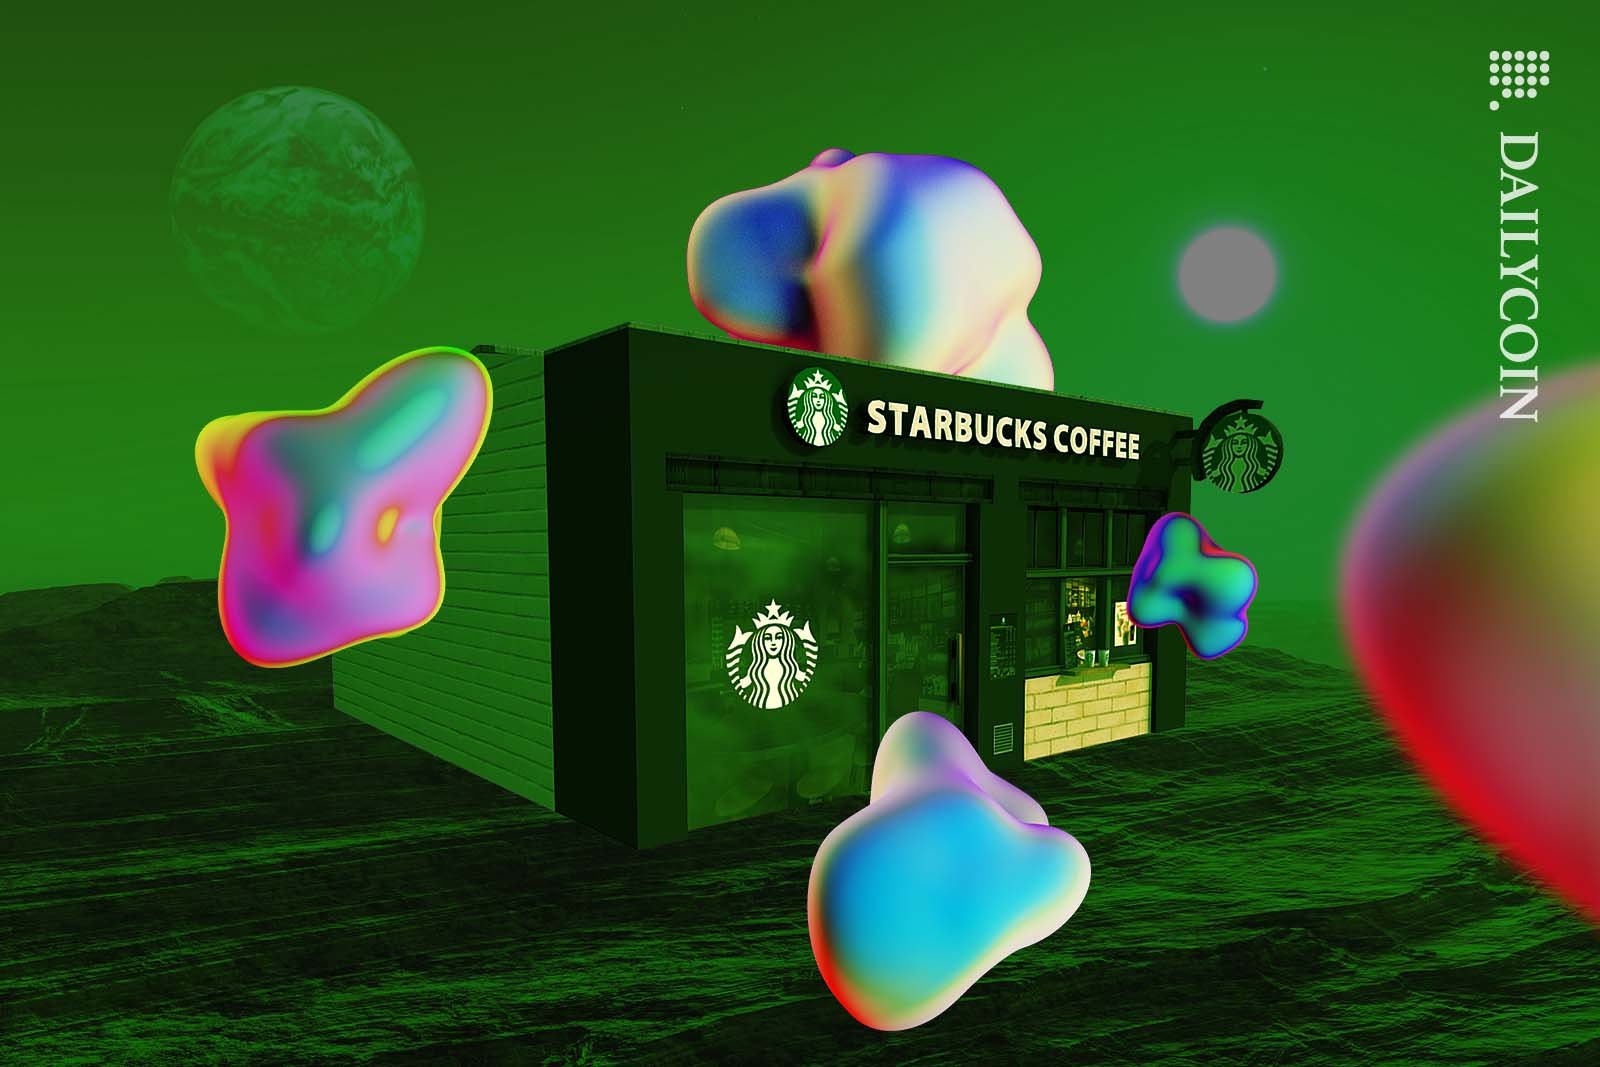 A Starbucks cafe on an alien planet surrounded by unidentified objects.